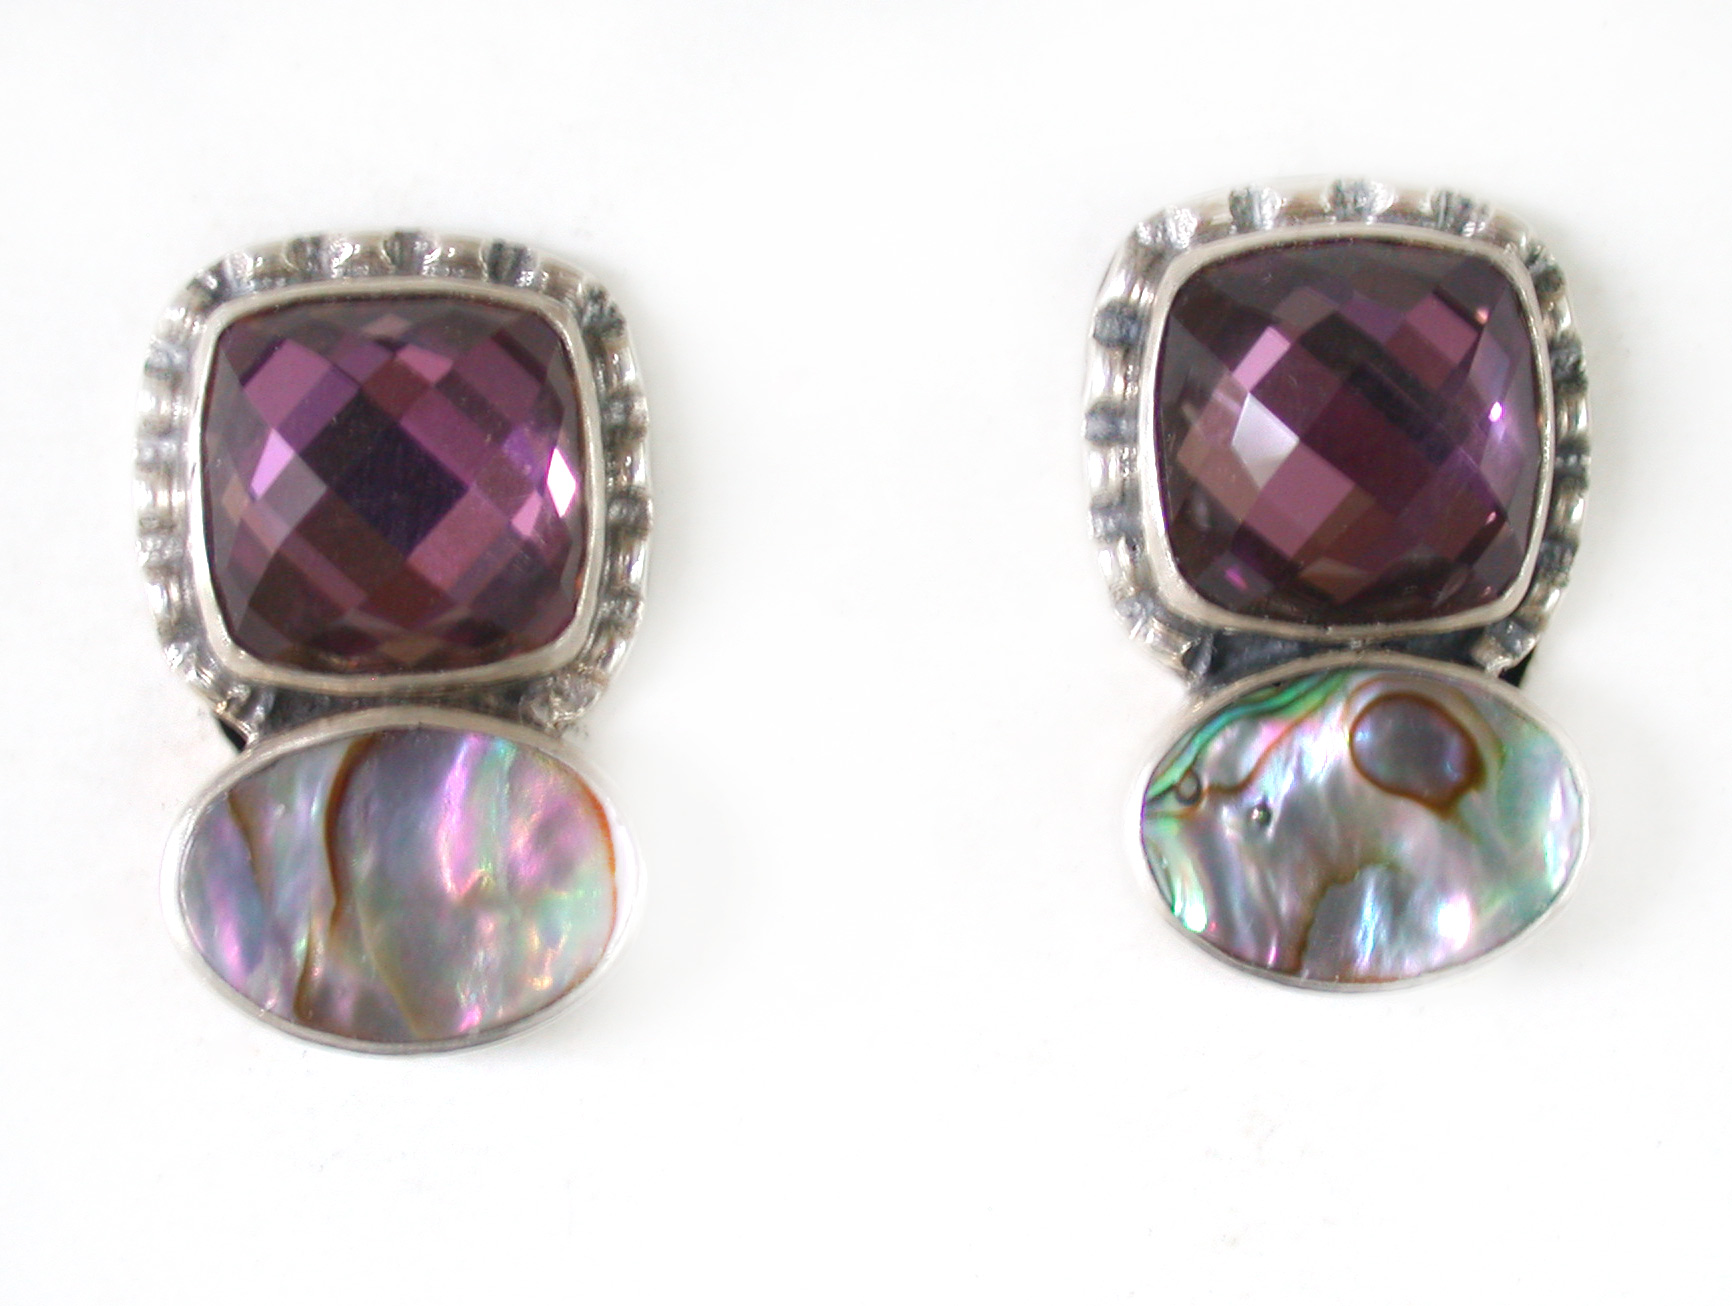 Amy Kahn Russell Online Trunk Show: Faceted Quartz and Abalone Clip Earrings | Rendezvous Gallery